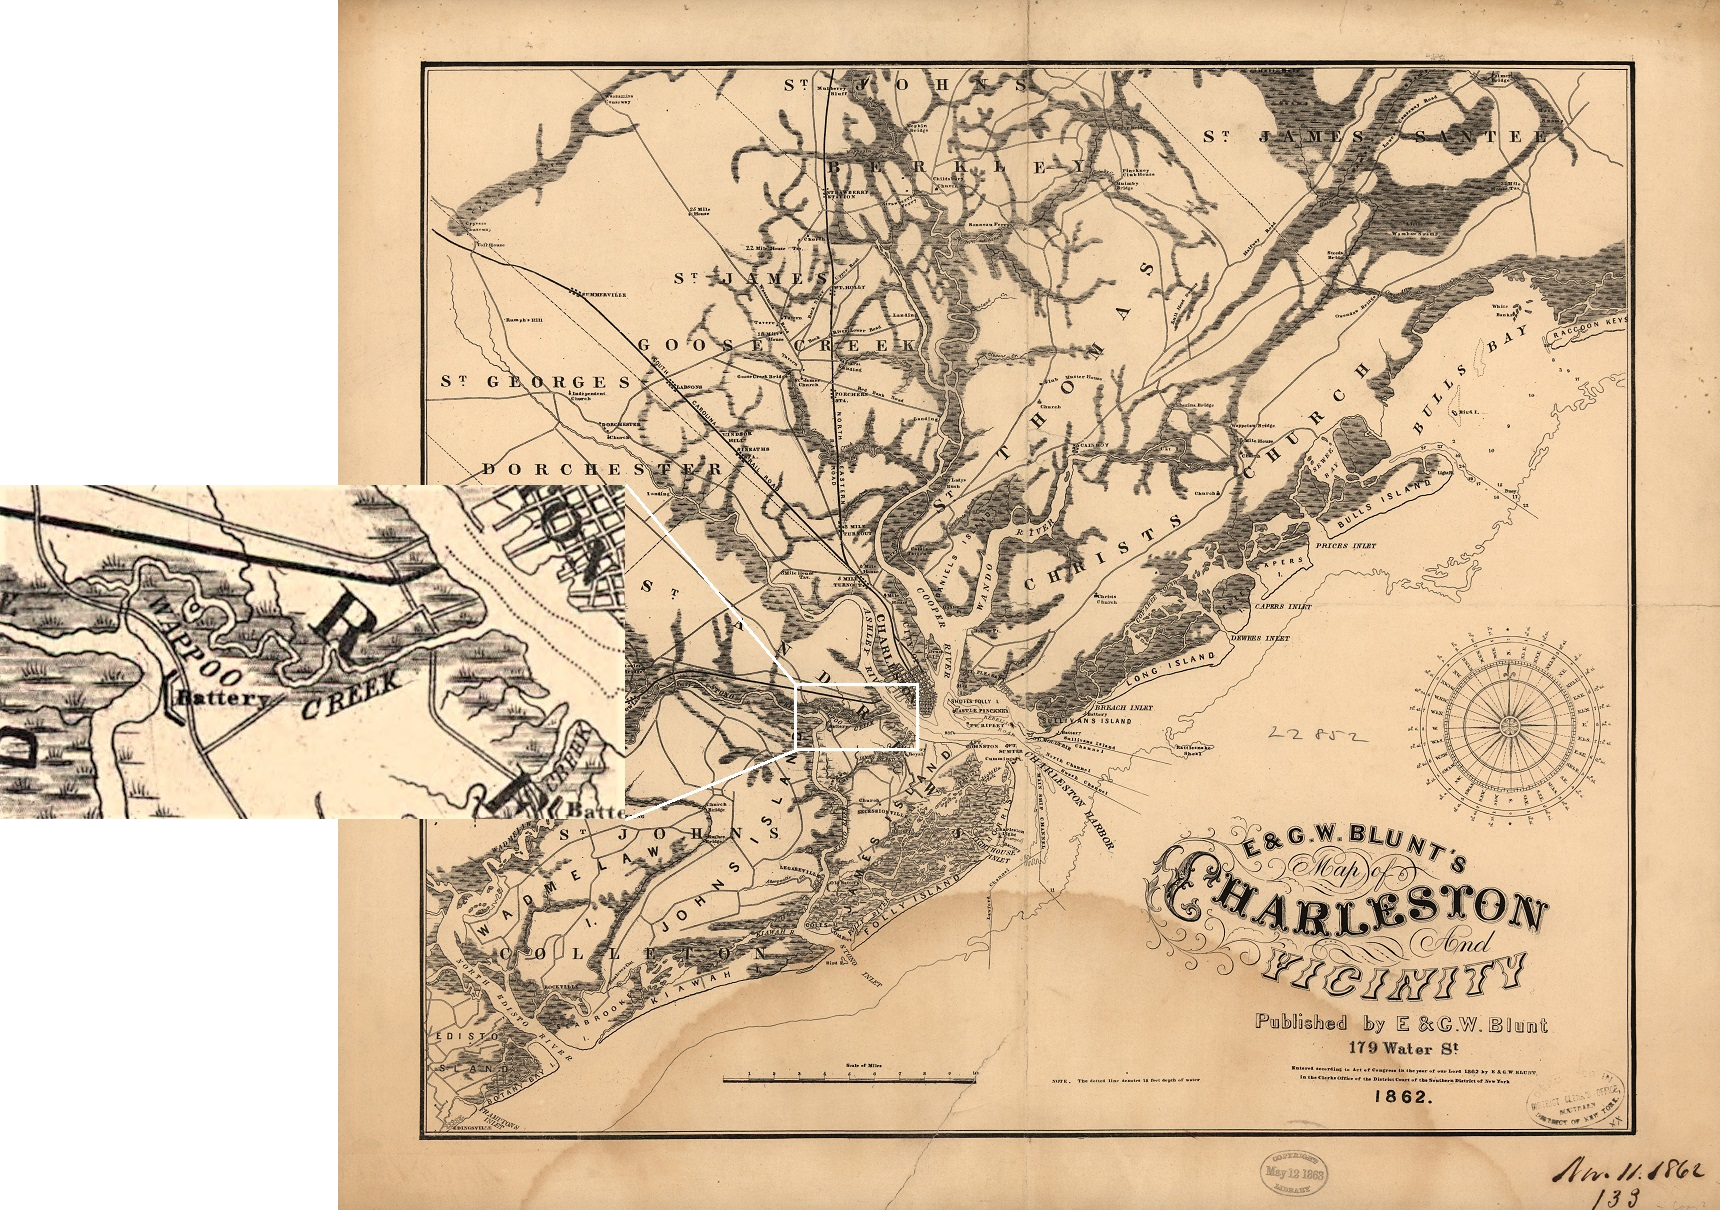 E. & G. W. Blunt's map of Charleston and vicinity